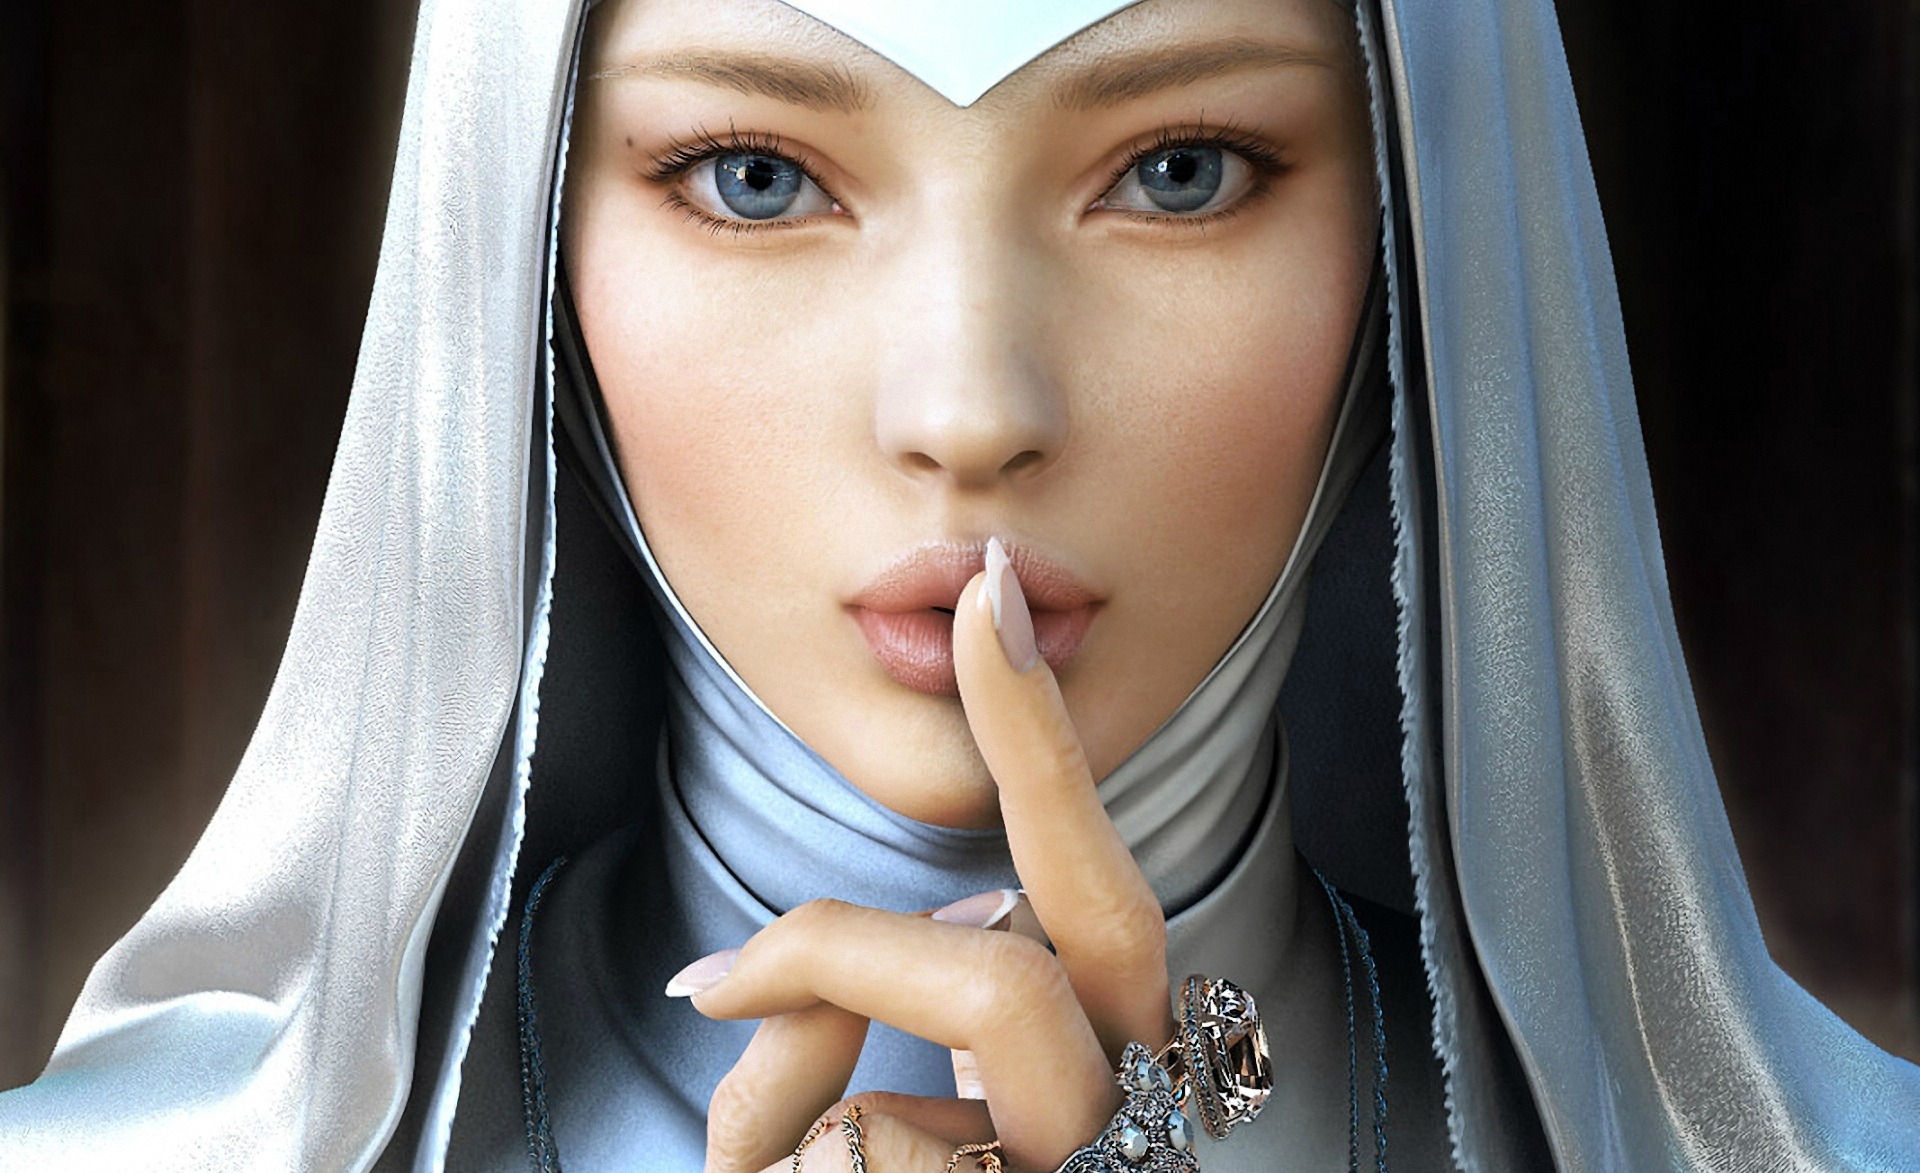 Fantasy artwork of a woman with blue eyes wearing a white ring as a nun, with an artistic touch.